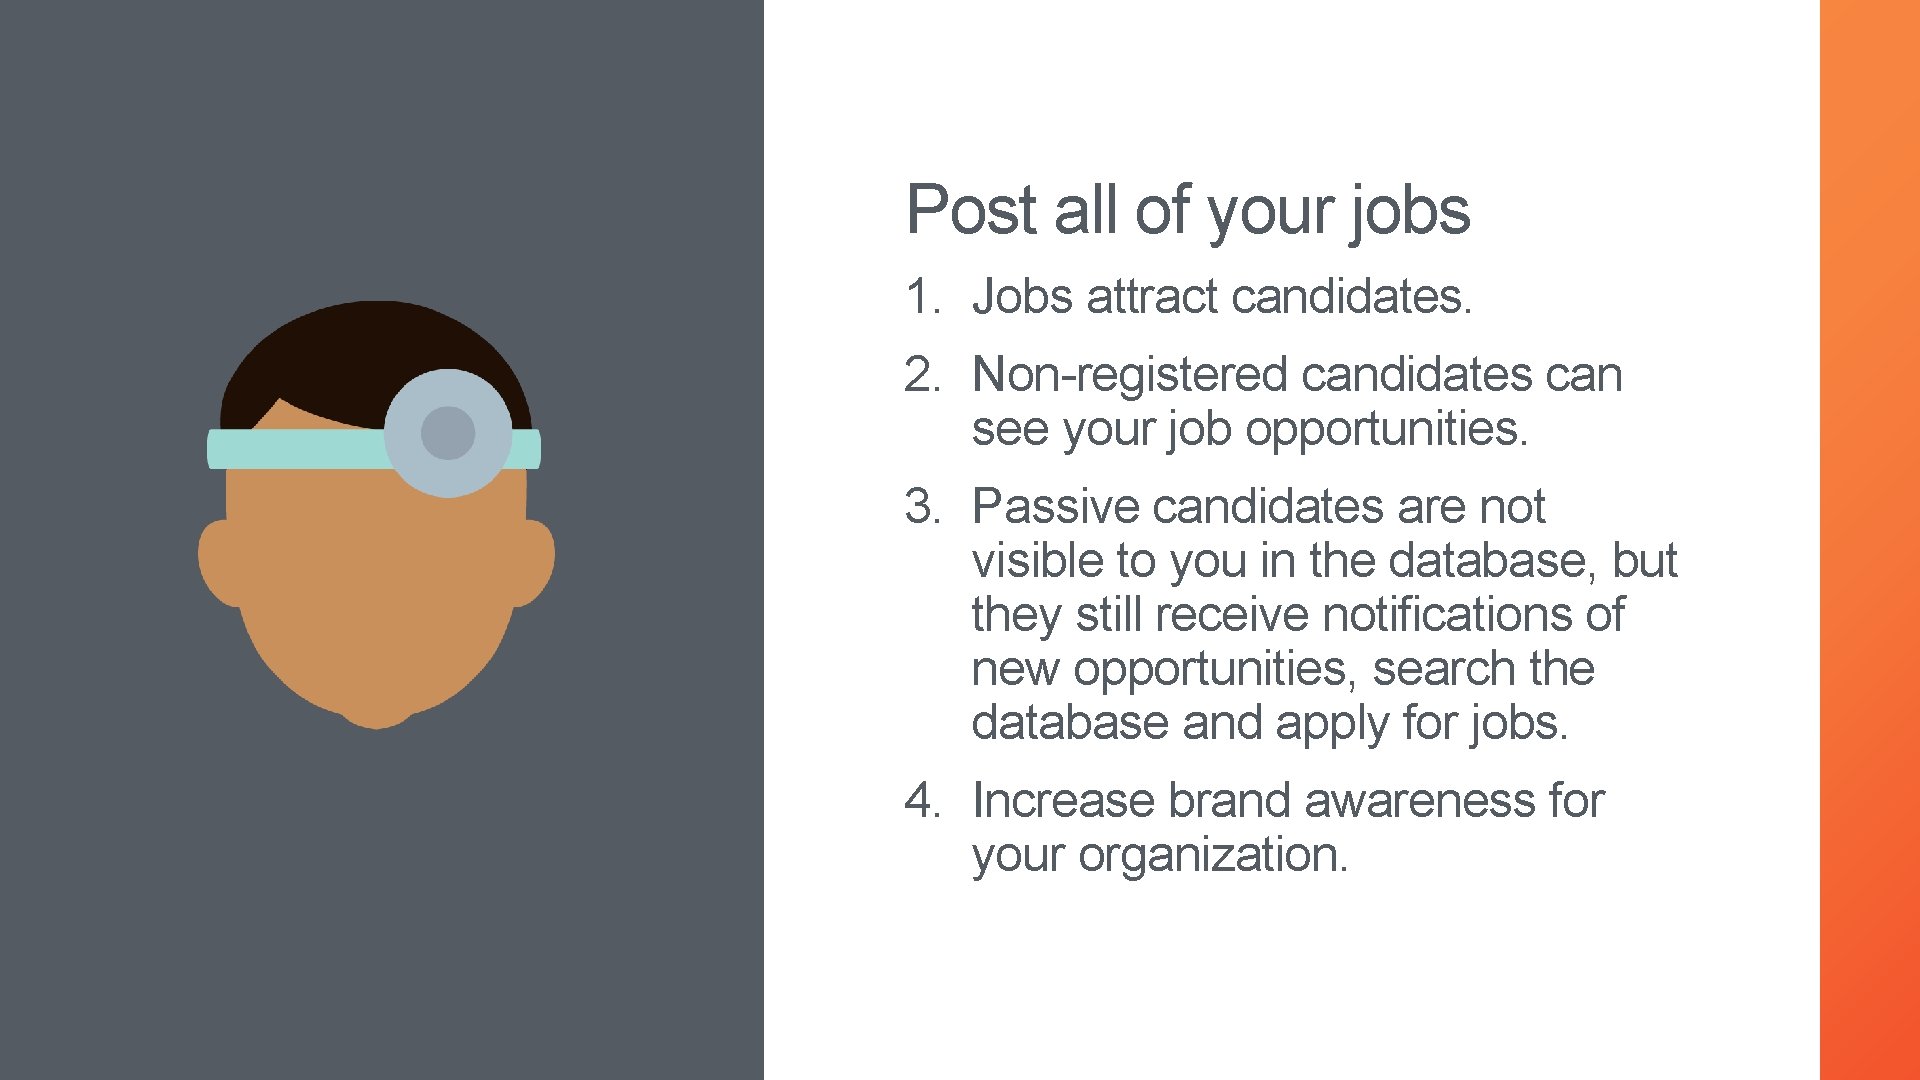 Post all of your jobs 1. Jobs attract candidates. 2. Non-registered candidates can see